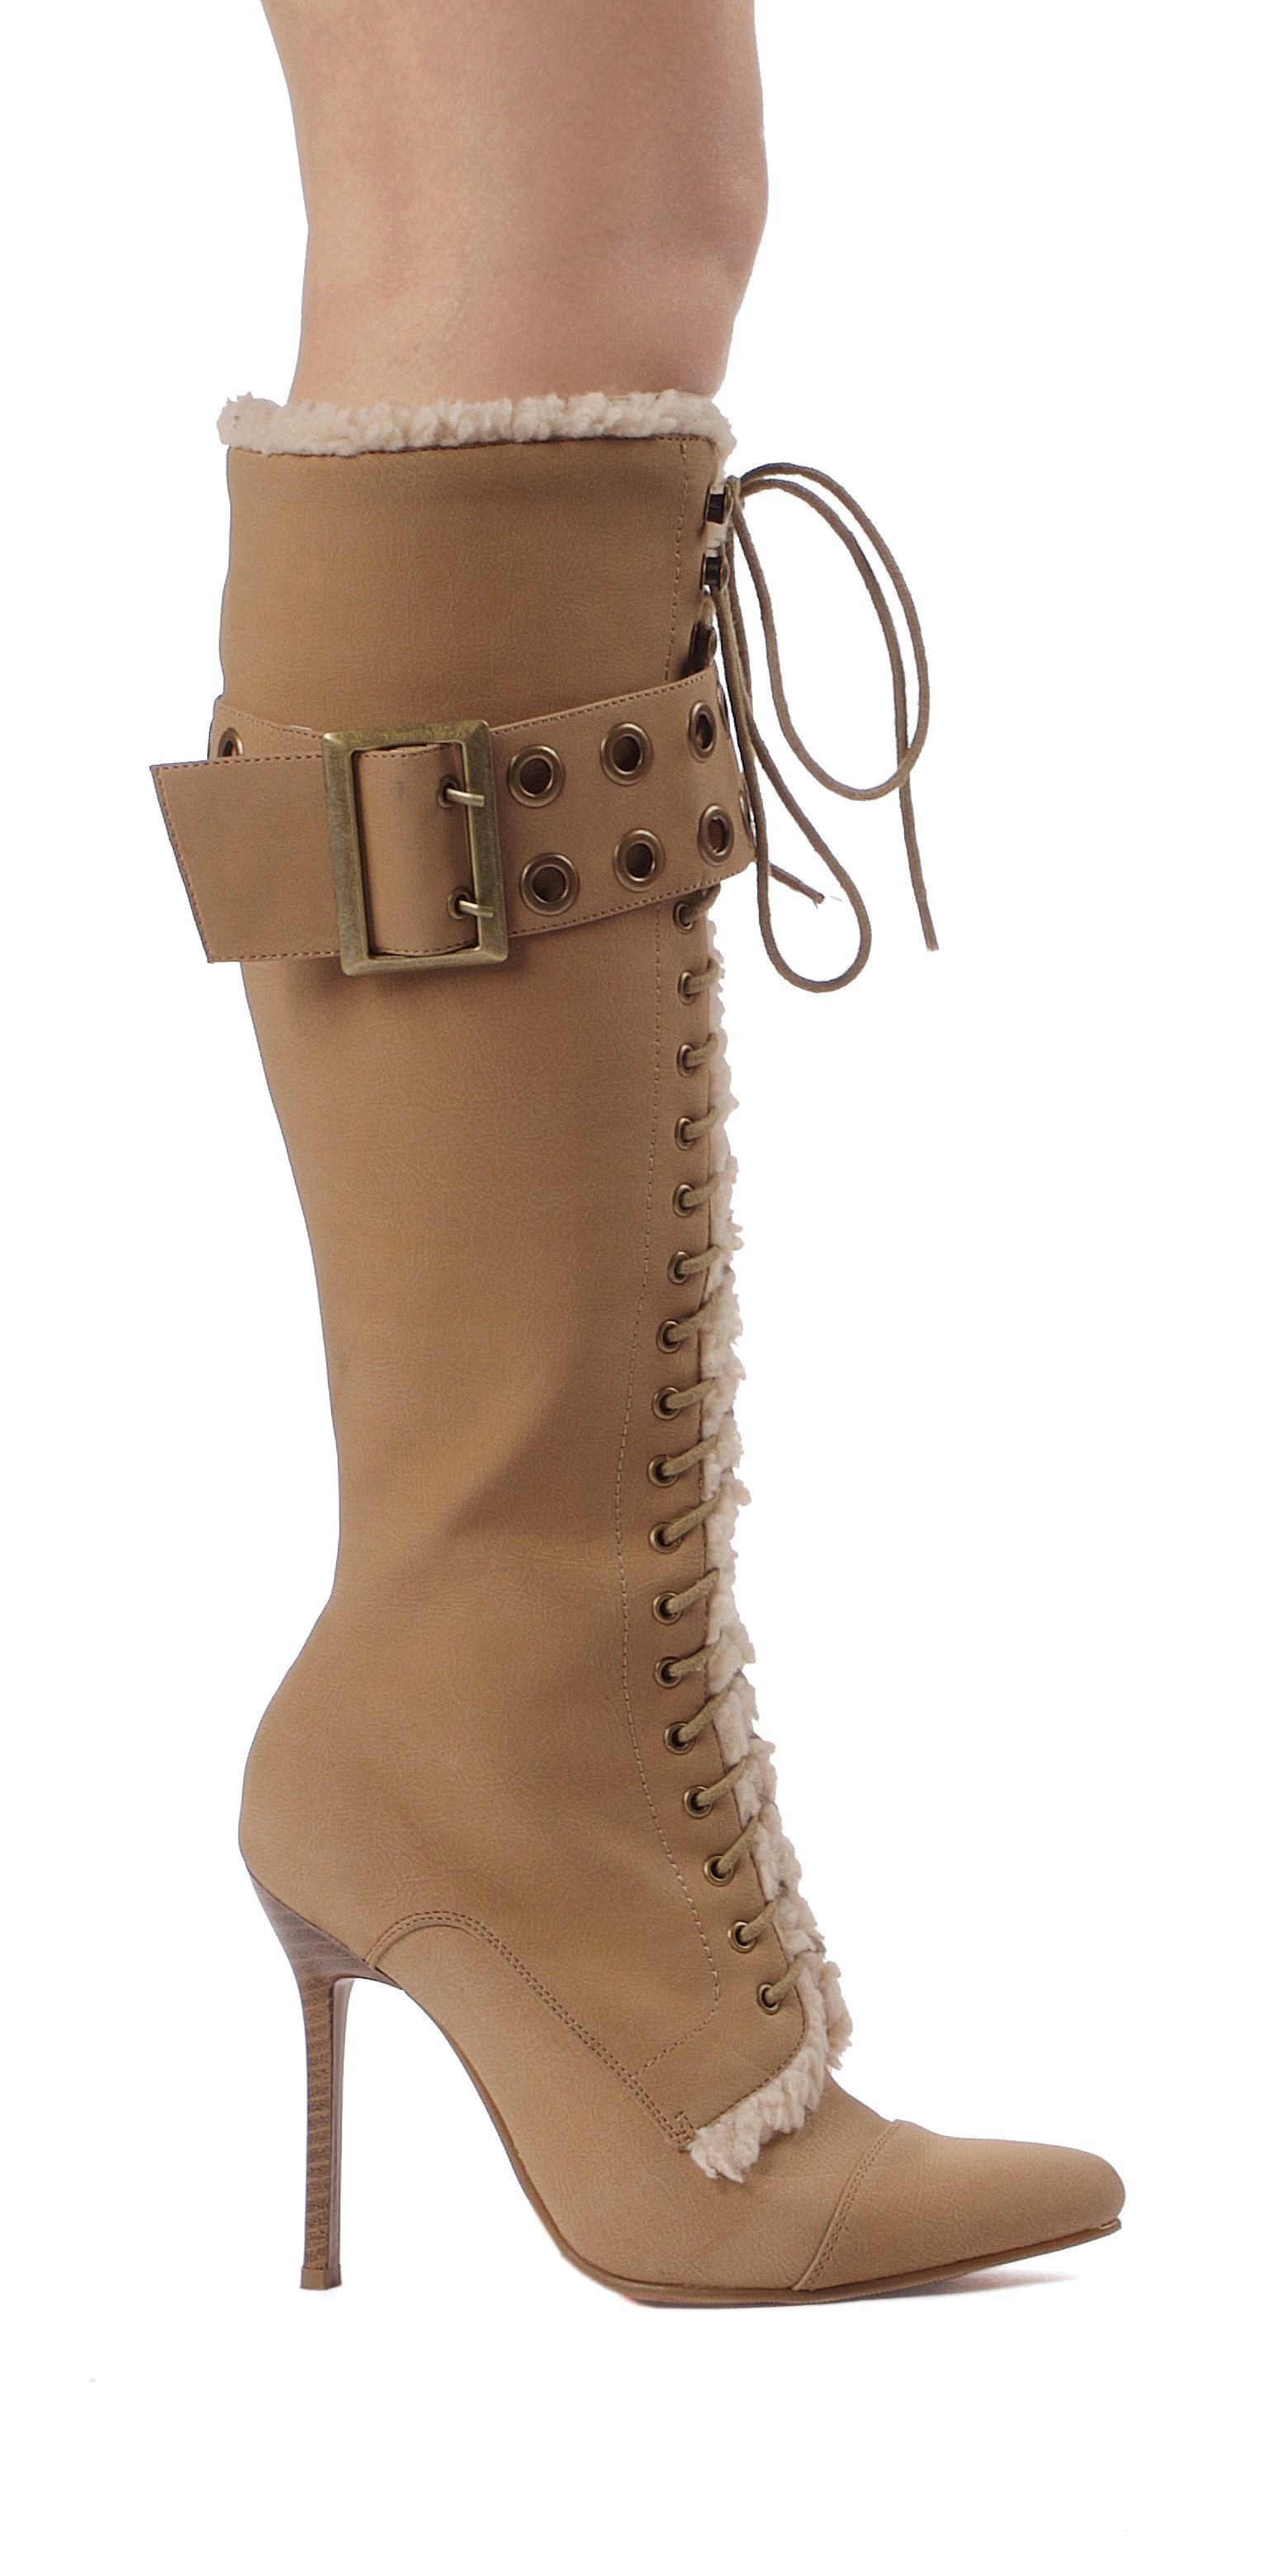 Andrea - 4 Inch Boots with Fur Trim and Buckle Strap Accent